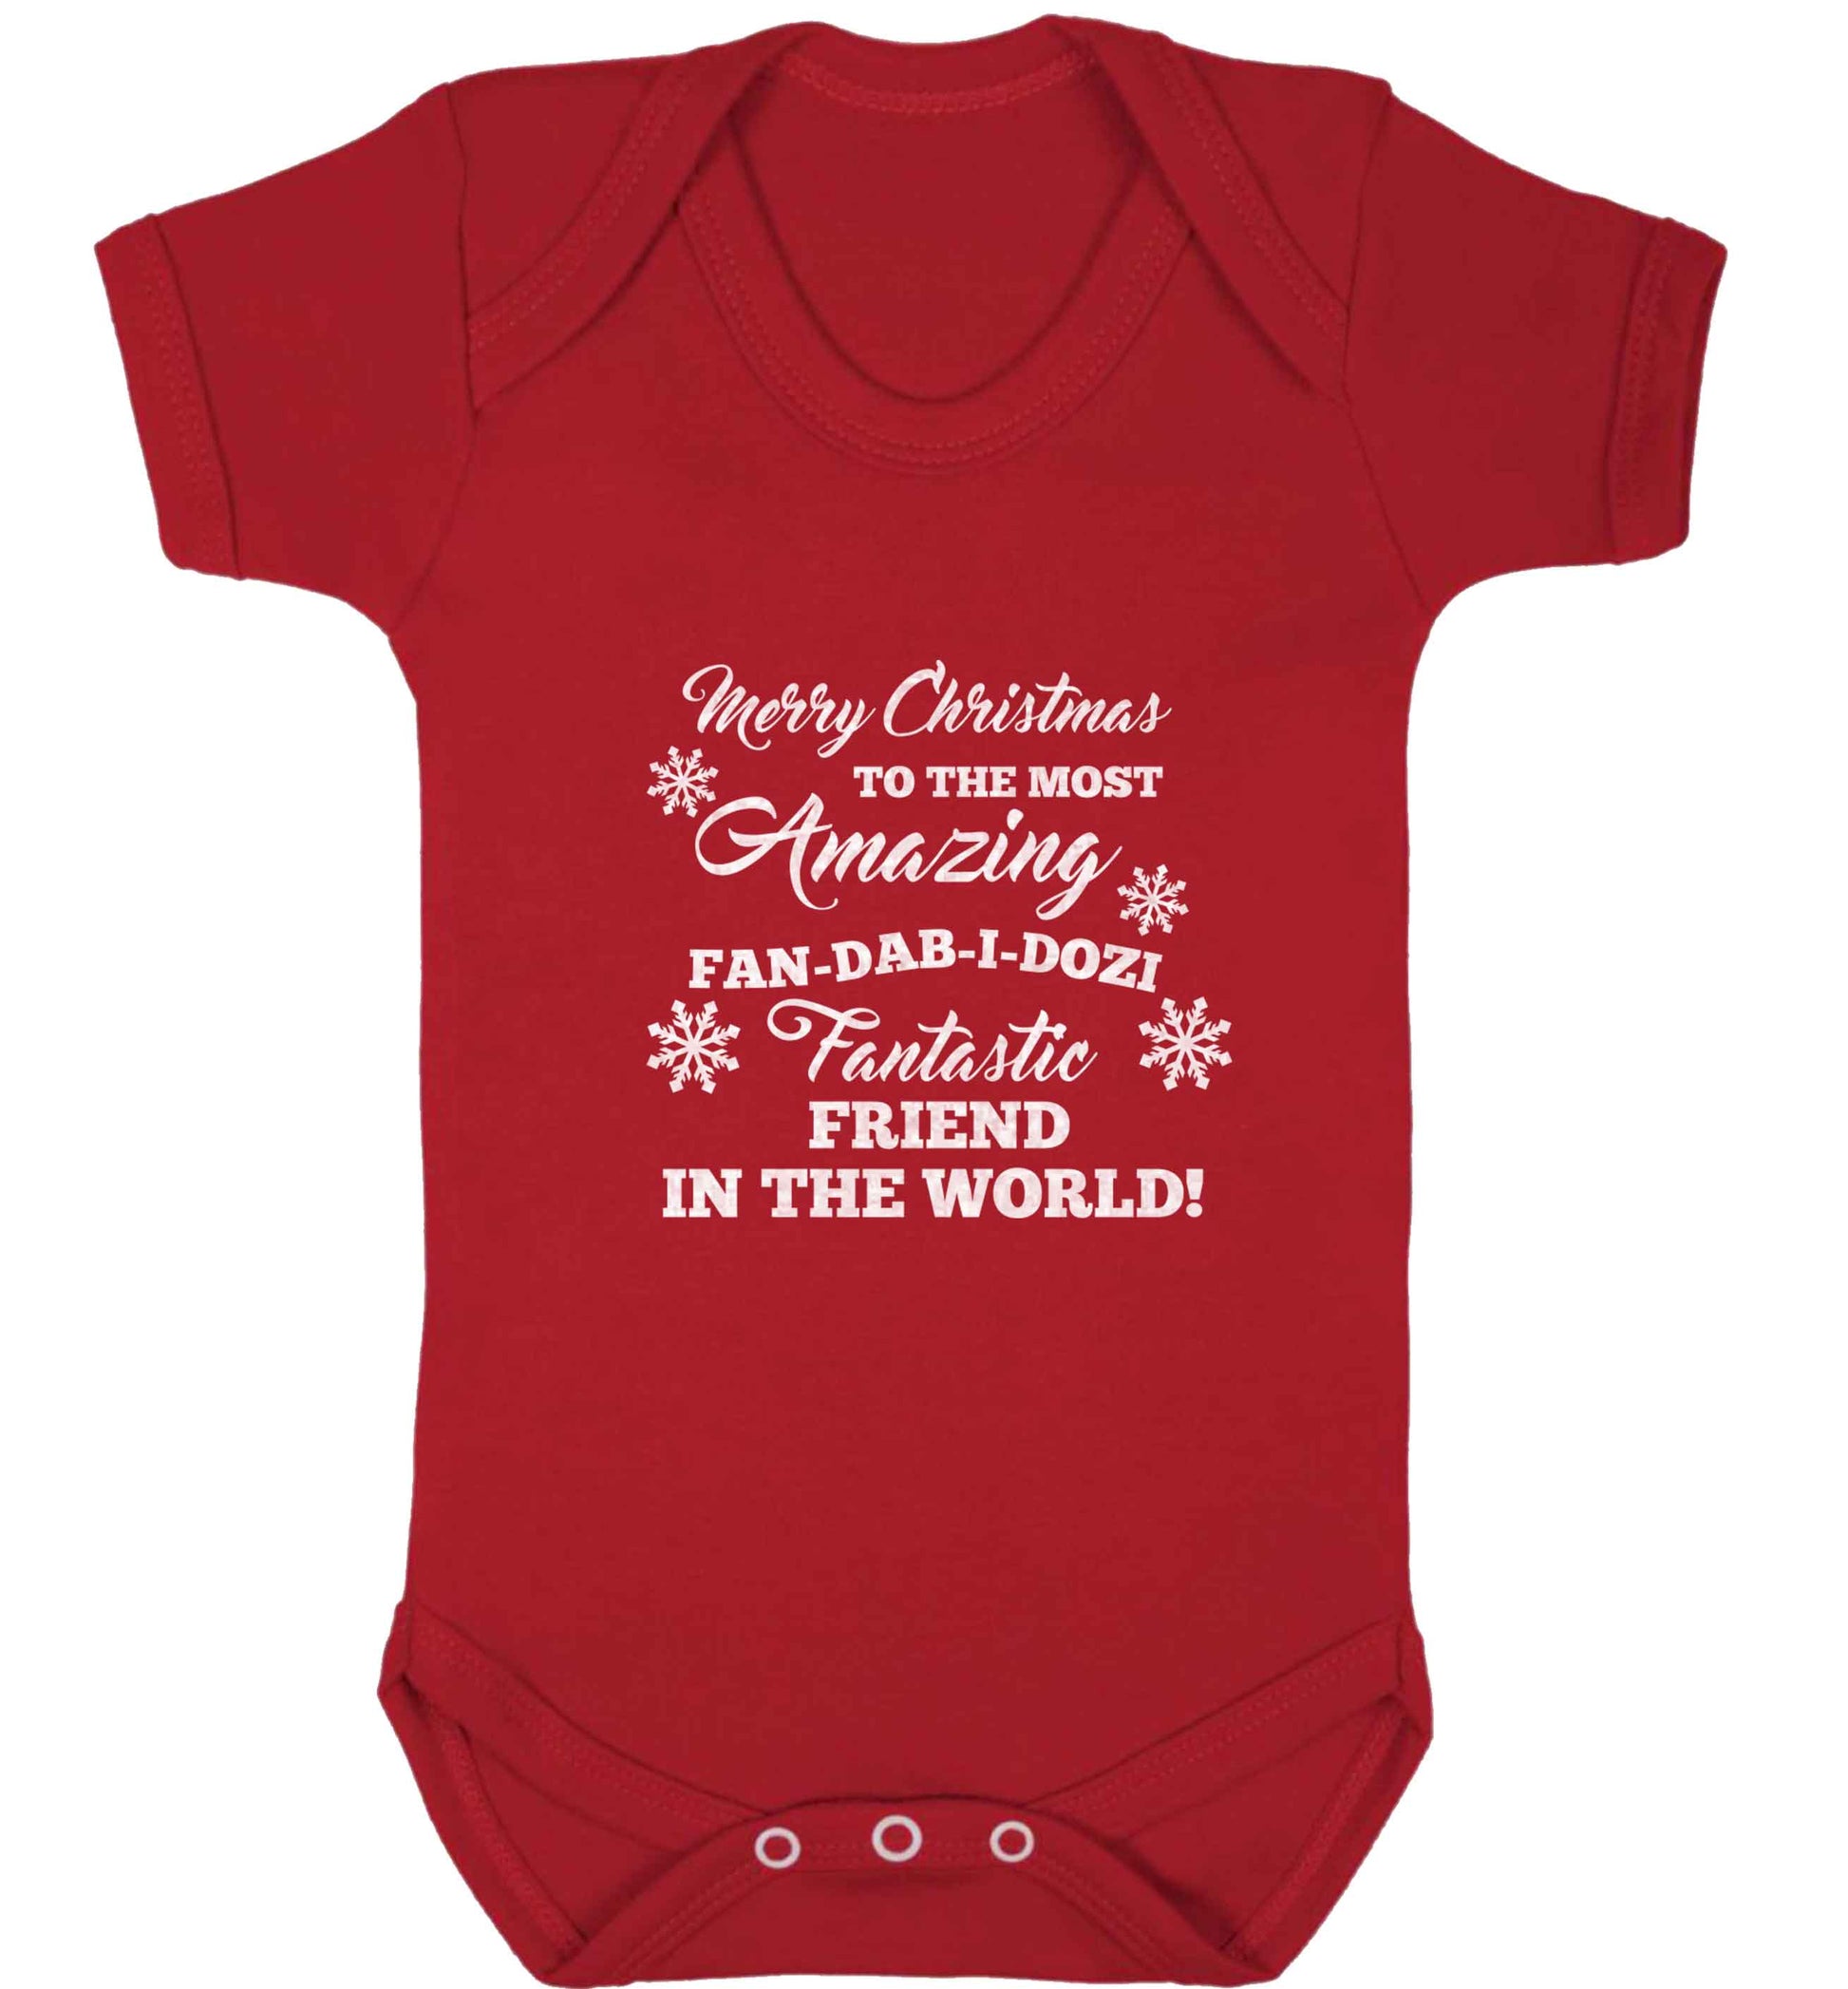 Merry Christmas to the most amazing fan-dab-i-dozi fantasic friend in the world baby vest red 18-24 months